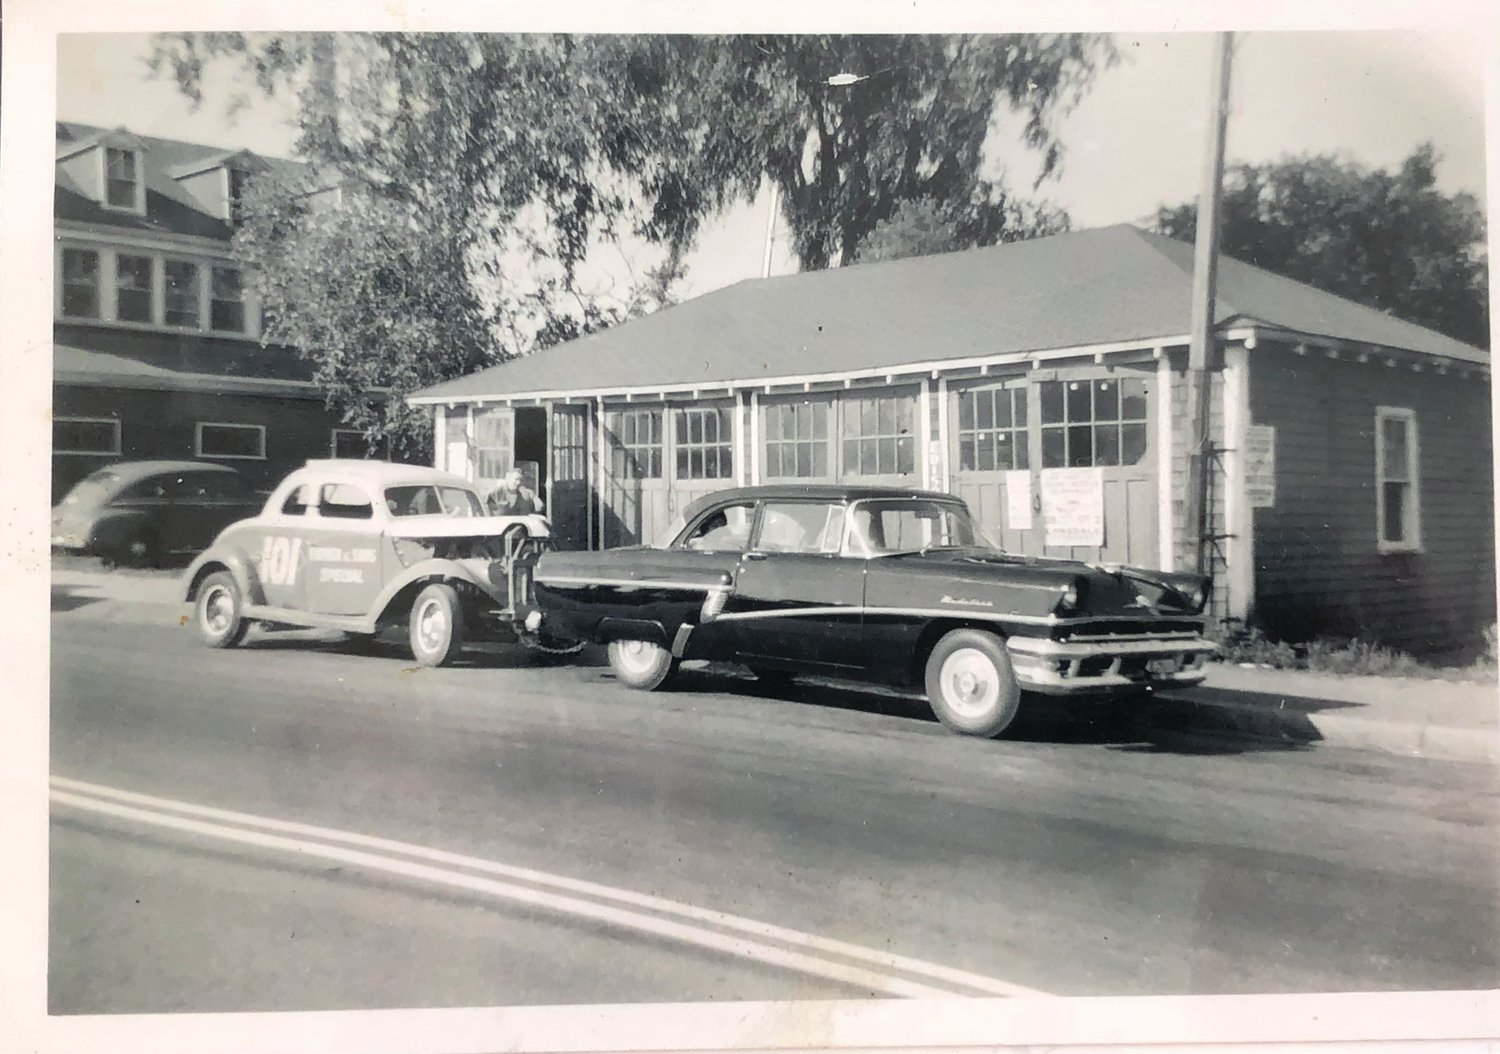 The faithful 1956 Mercury Montclair towed the 101 to its races. Idella Rounds, Lewis’s mother, seen through the passenger side window, always attended the races.